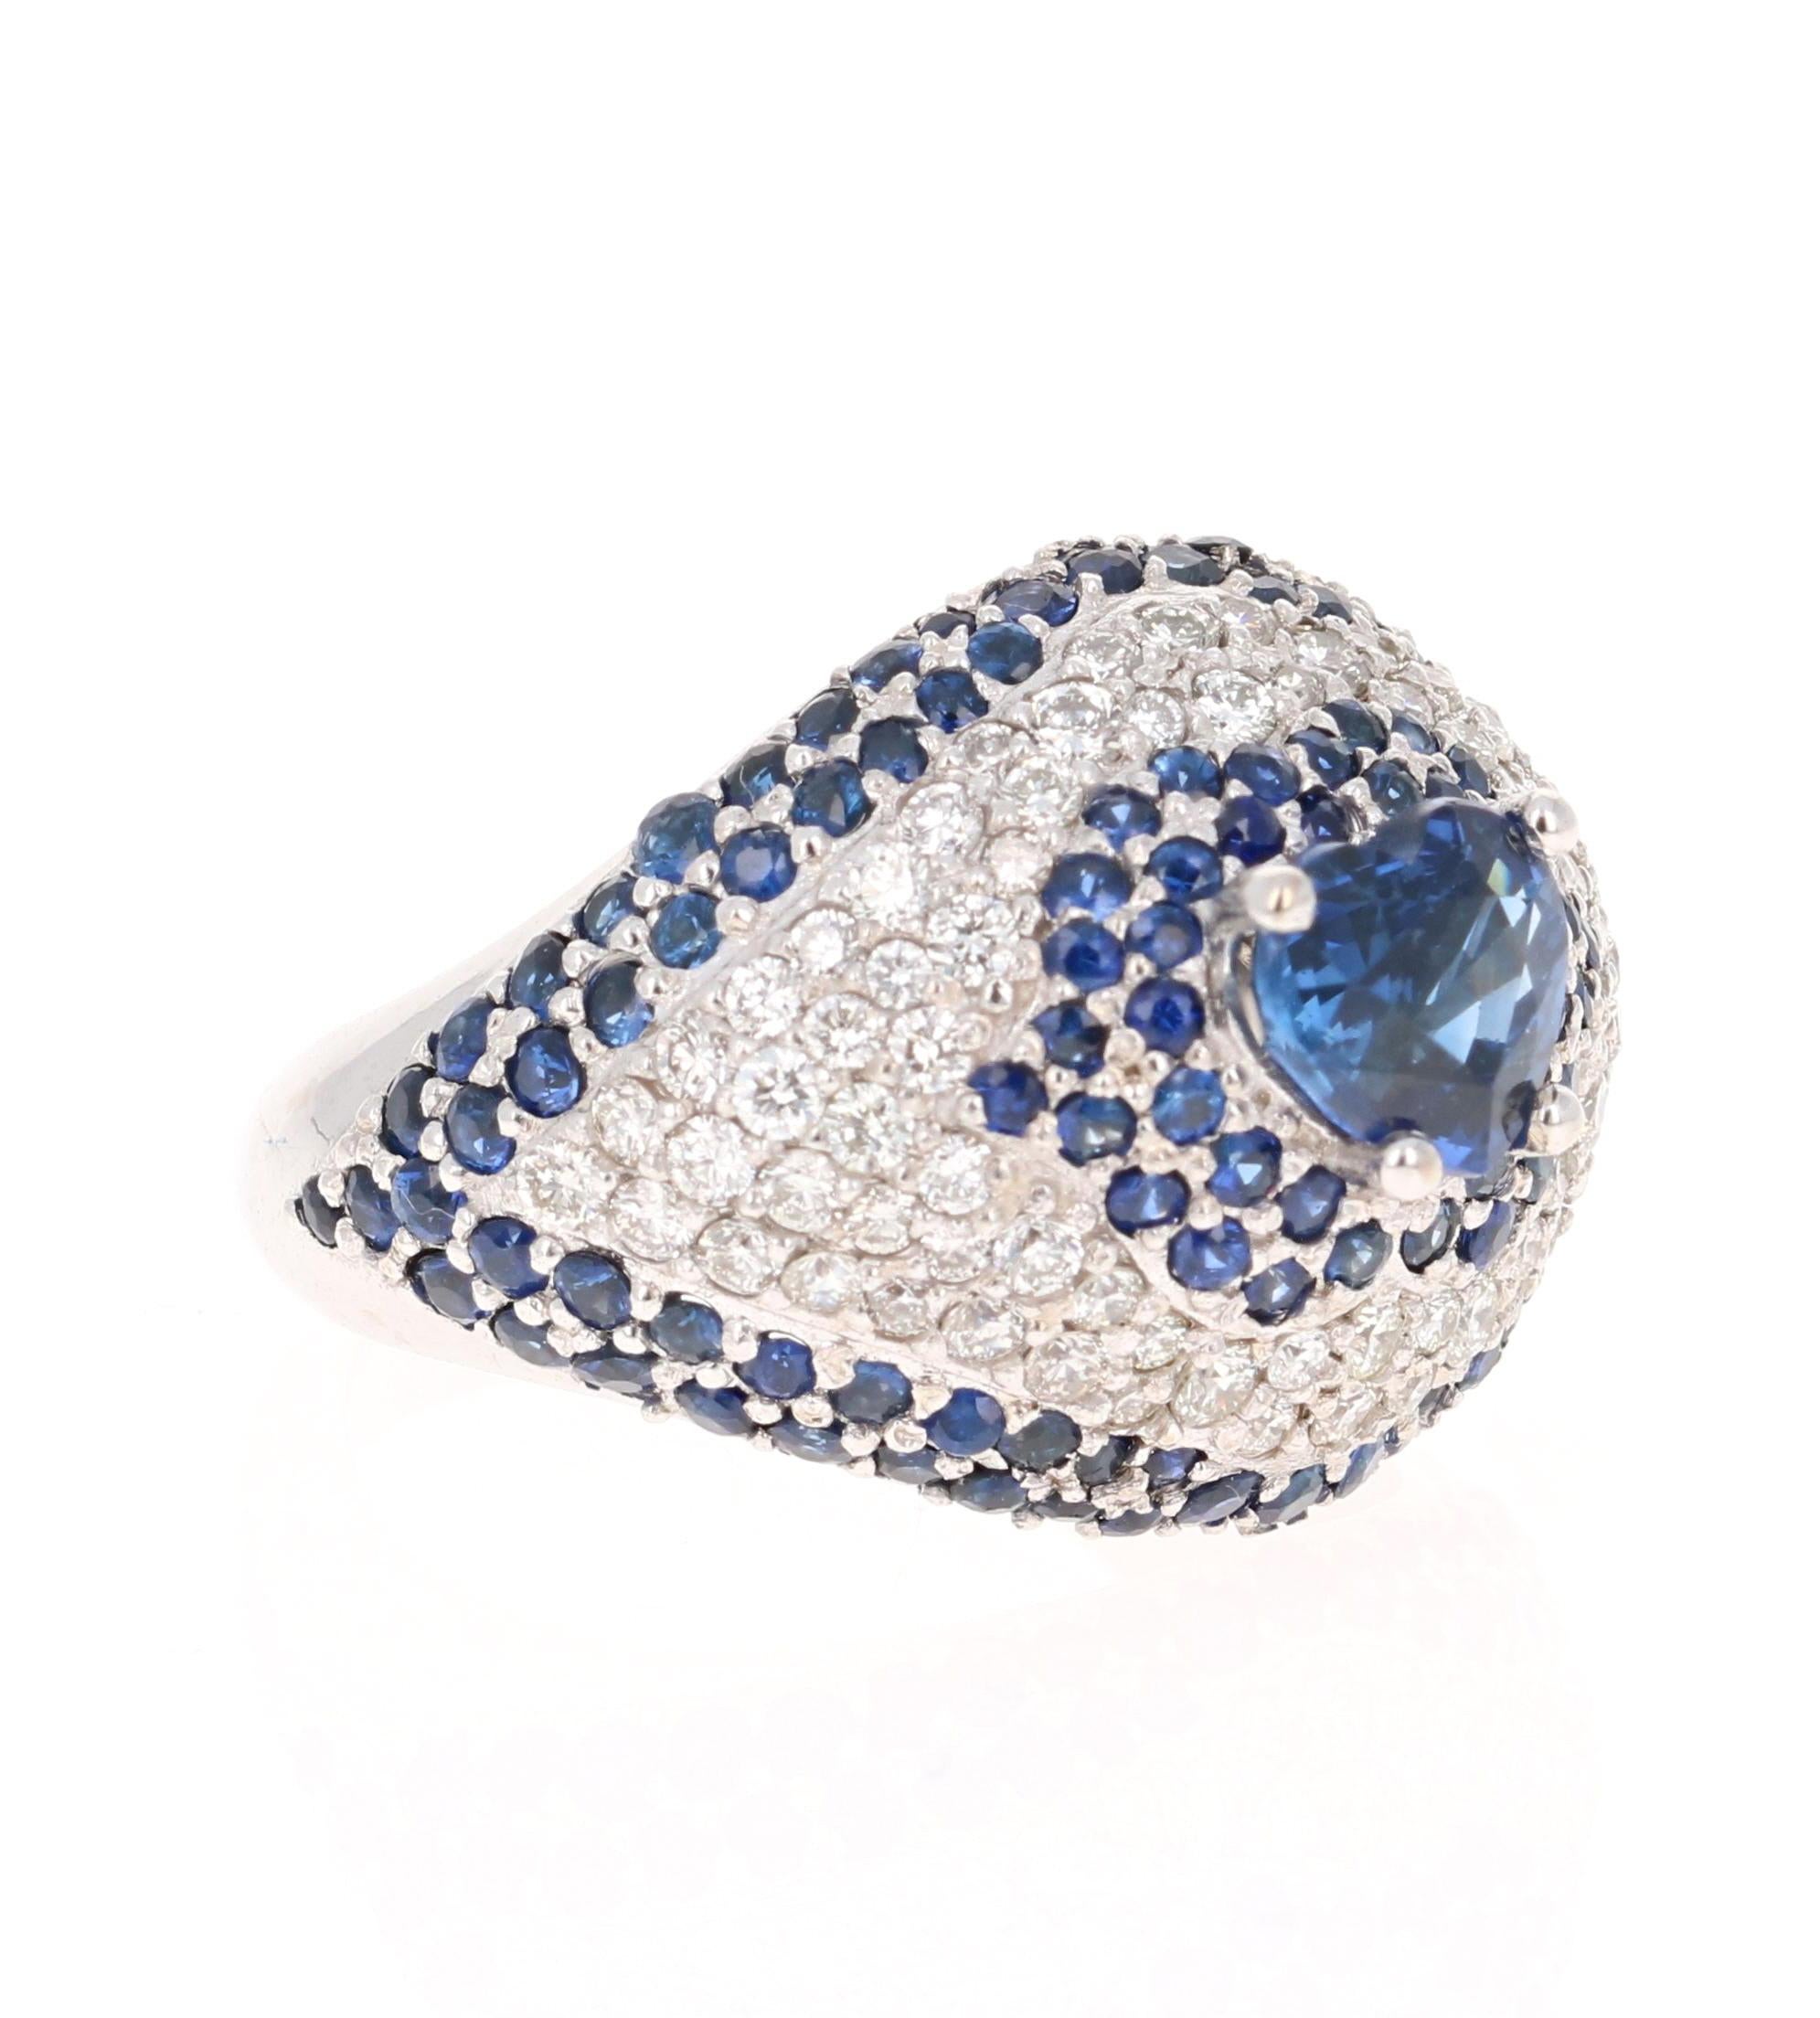 This beautiful blue sapphire ring has a Heart Cut 1.27 Carat Blue Sapphire and is surrounded by 130 Sapphires that weigh 1.95 Carats. It is further embellished with 78 Round Cut Diamonds that weigh 0.95 Carats. The total carat weight of the ring is